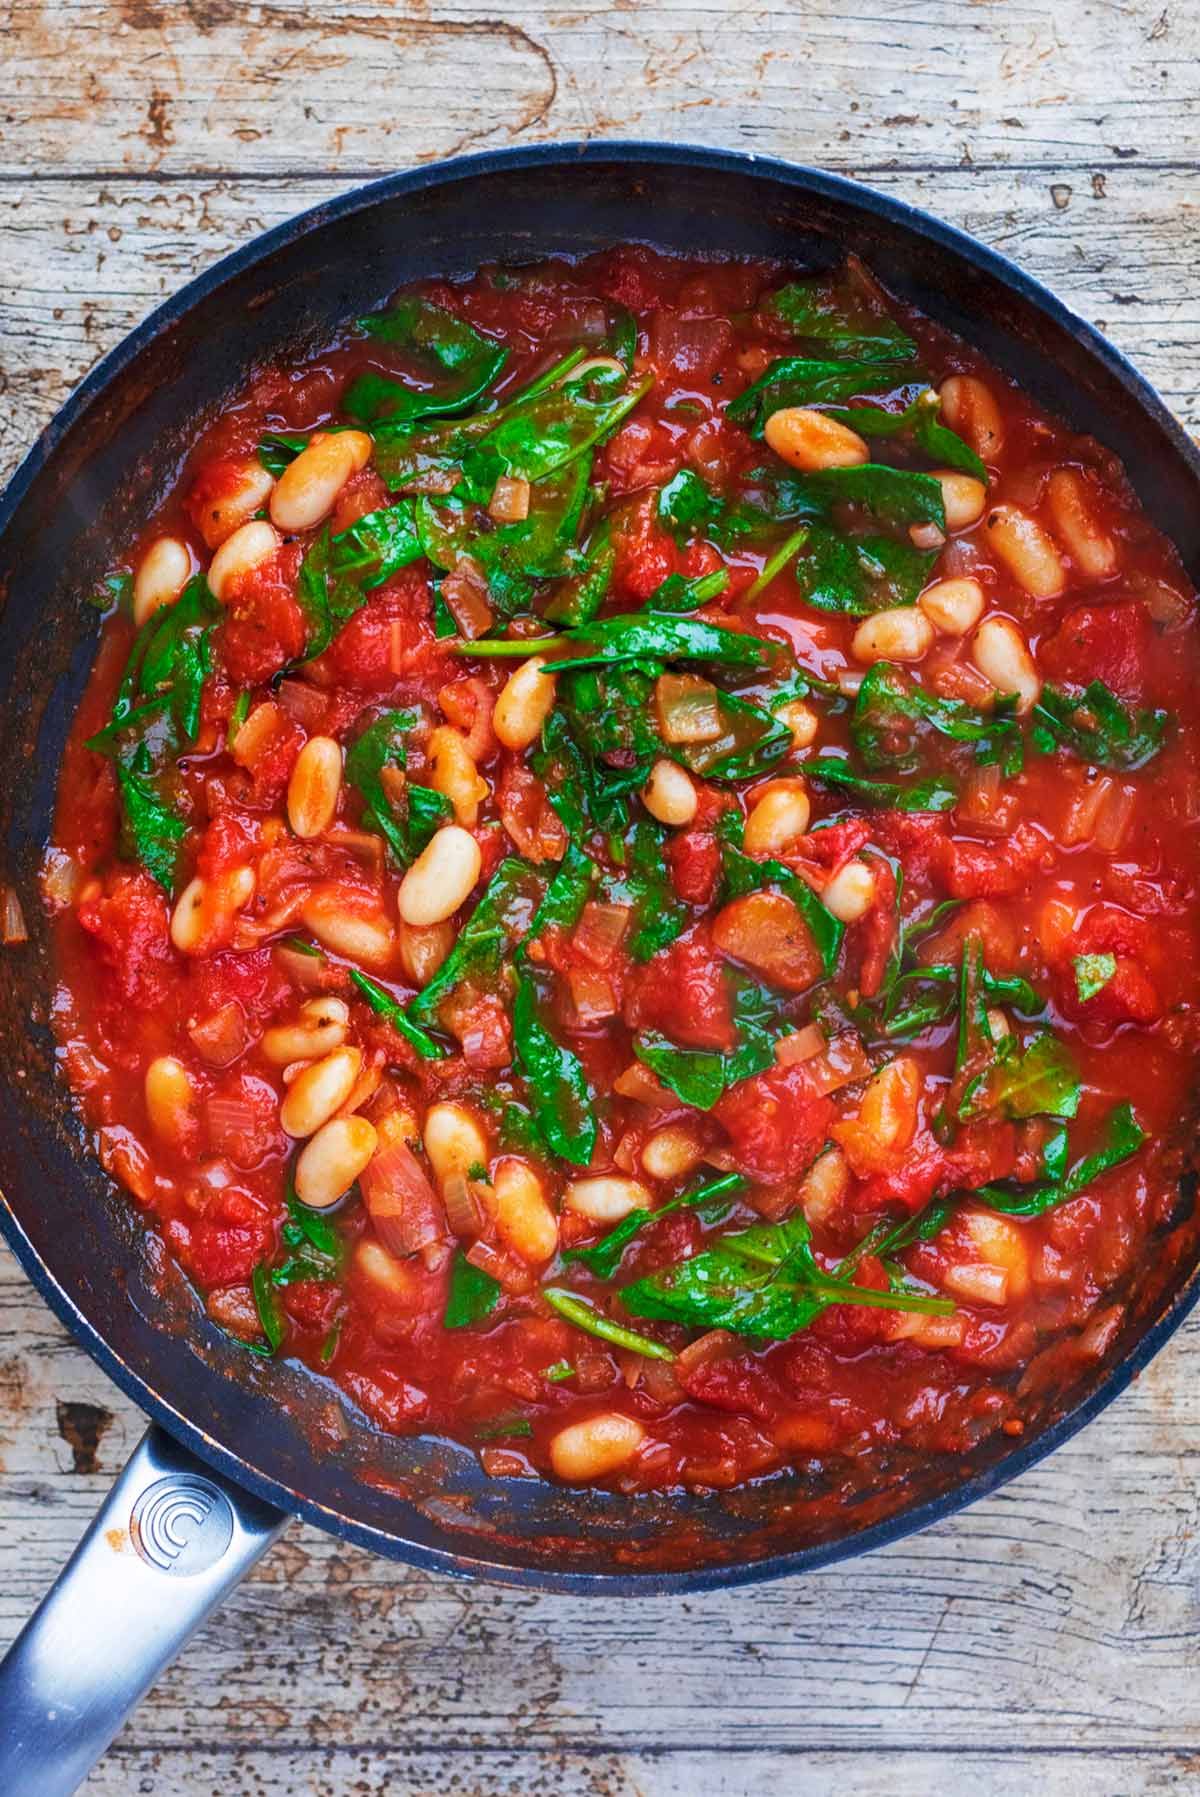 Pasta and beans in a frying pan in a tomato sauce with spinach.